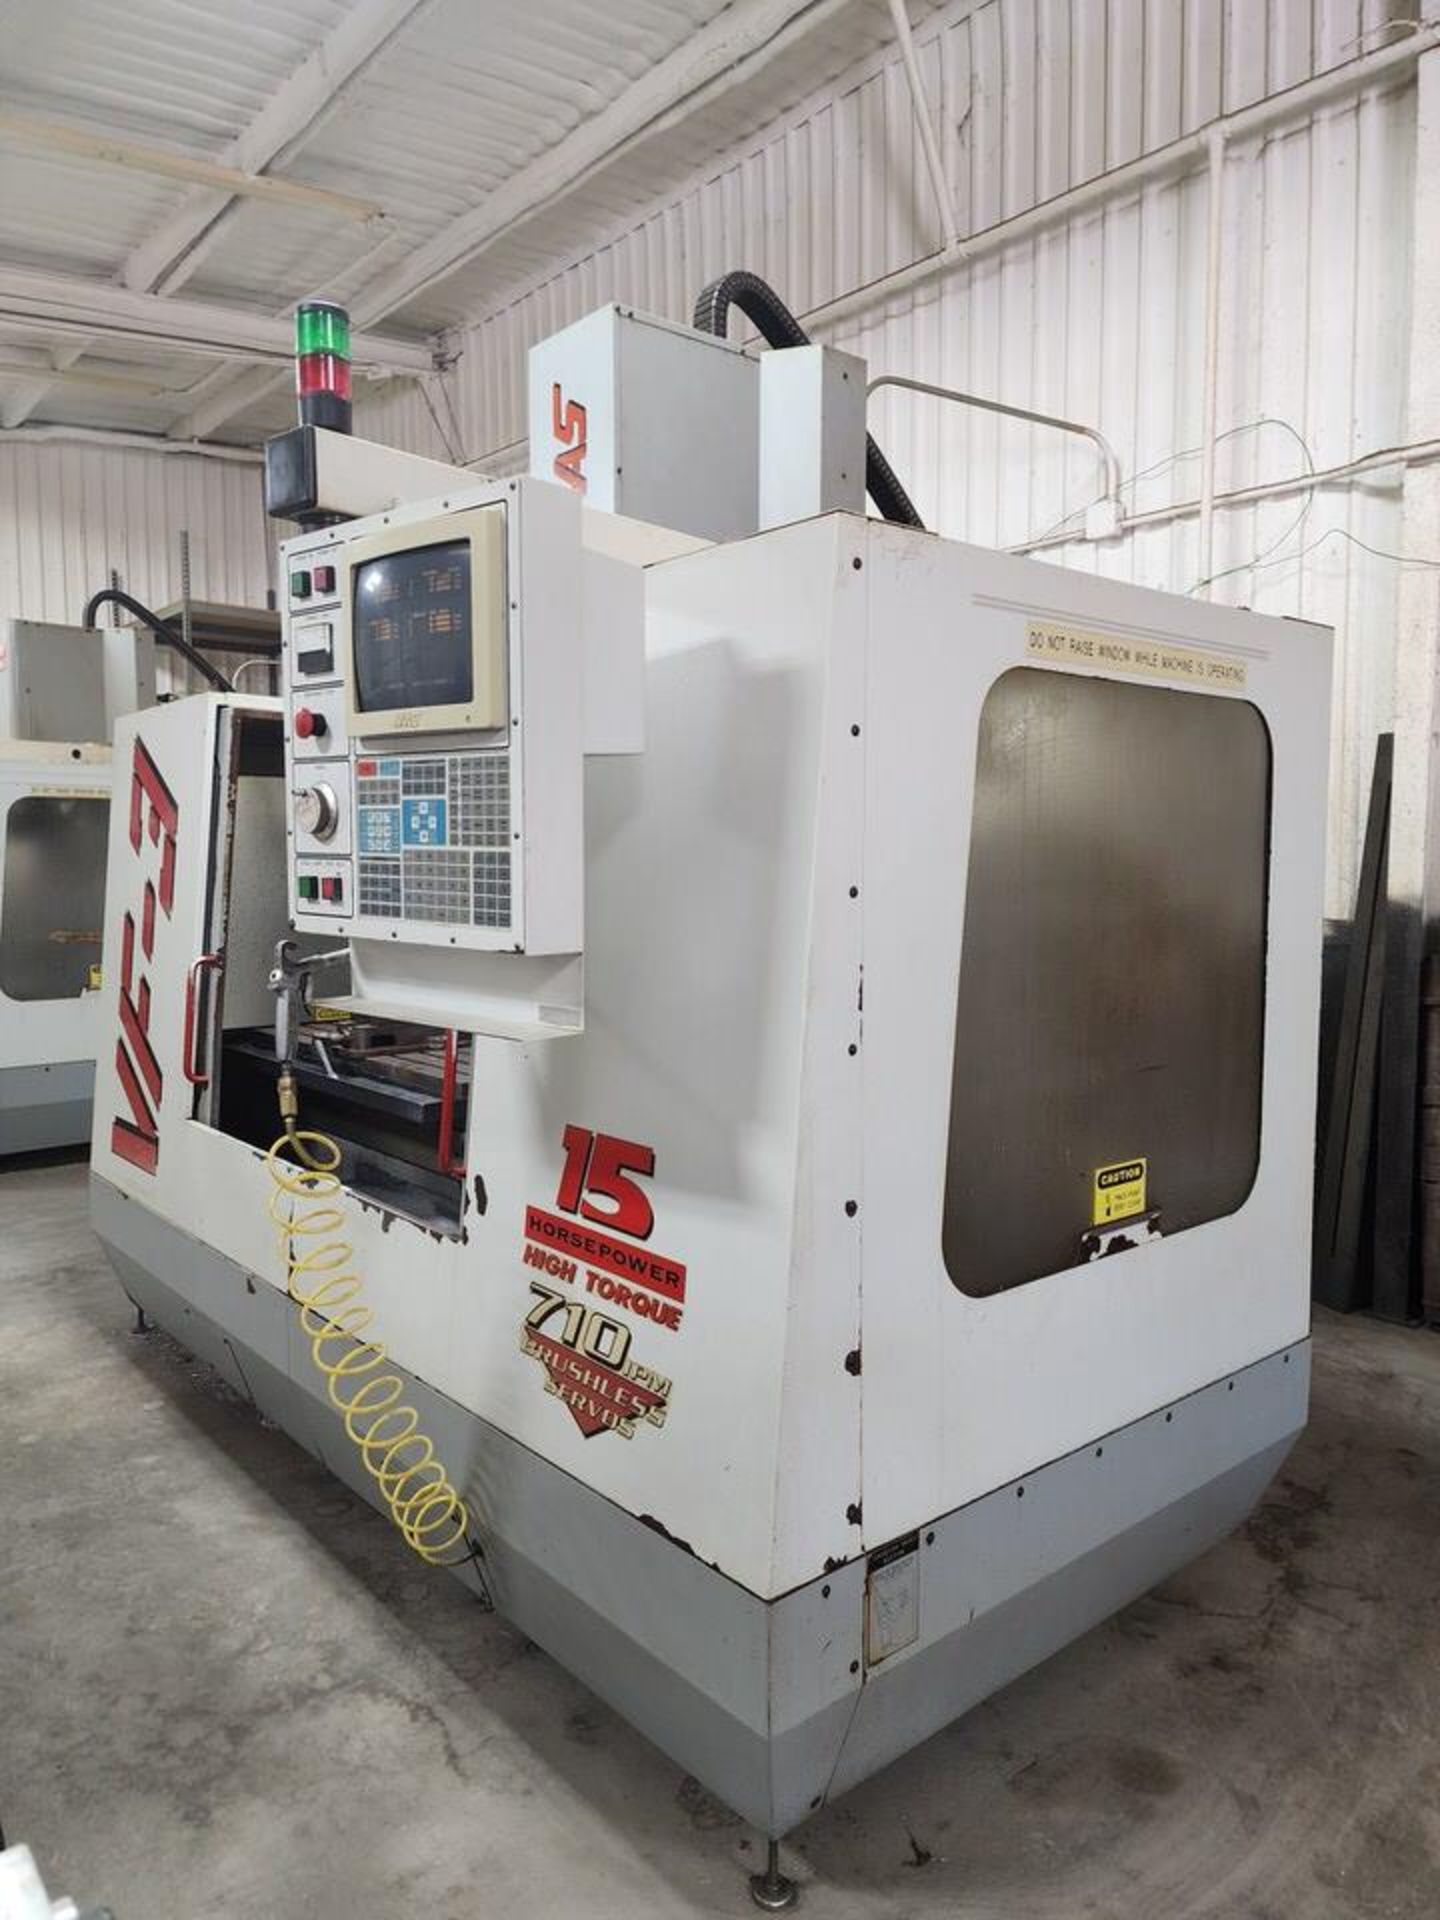 1996 Haas VF3 Milling Machine 208/230V, 3PH, 50/60HZ, Full Load: 40A; Largest Load: 30A; - Image 13 of 18